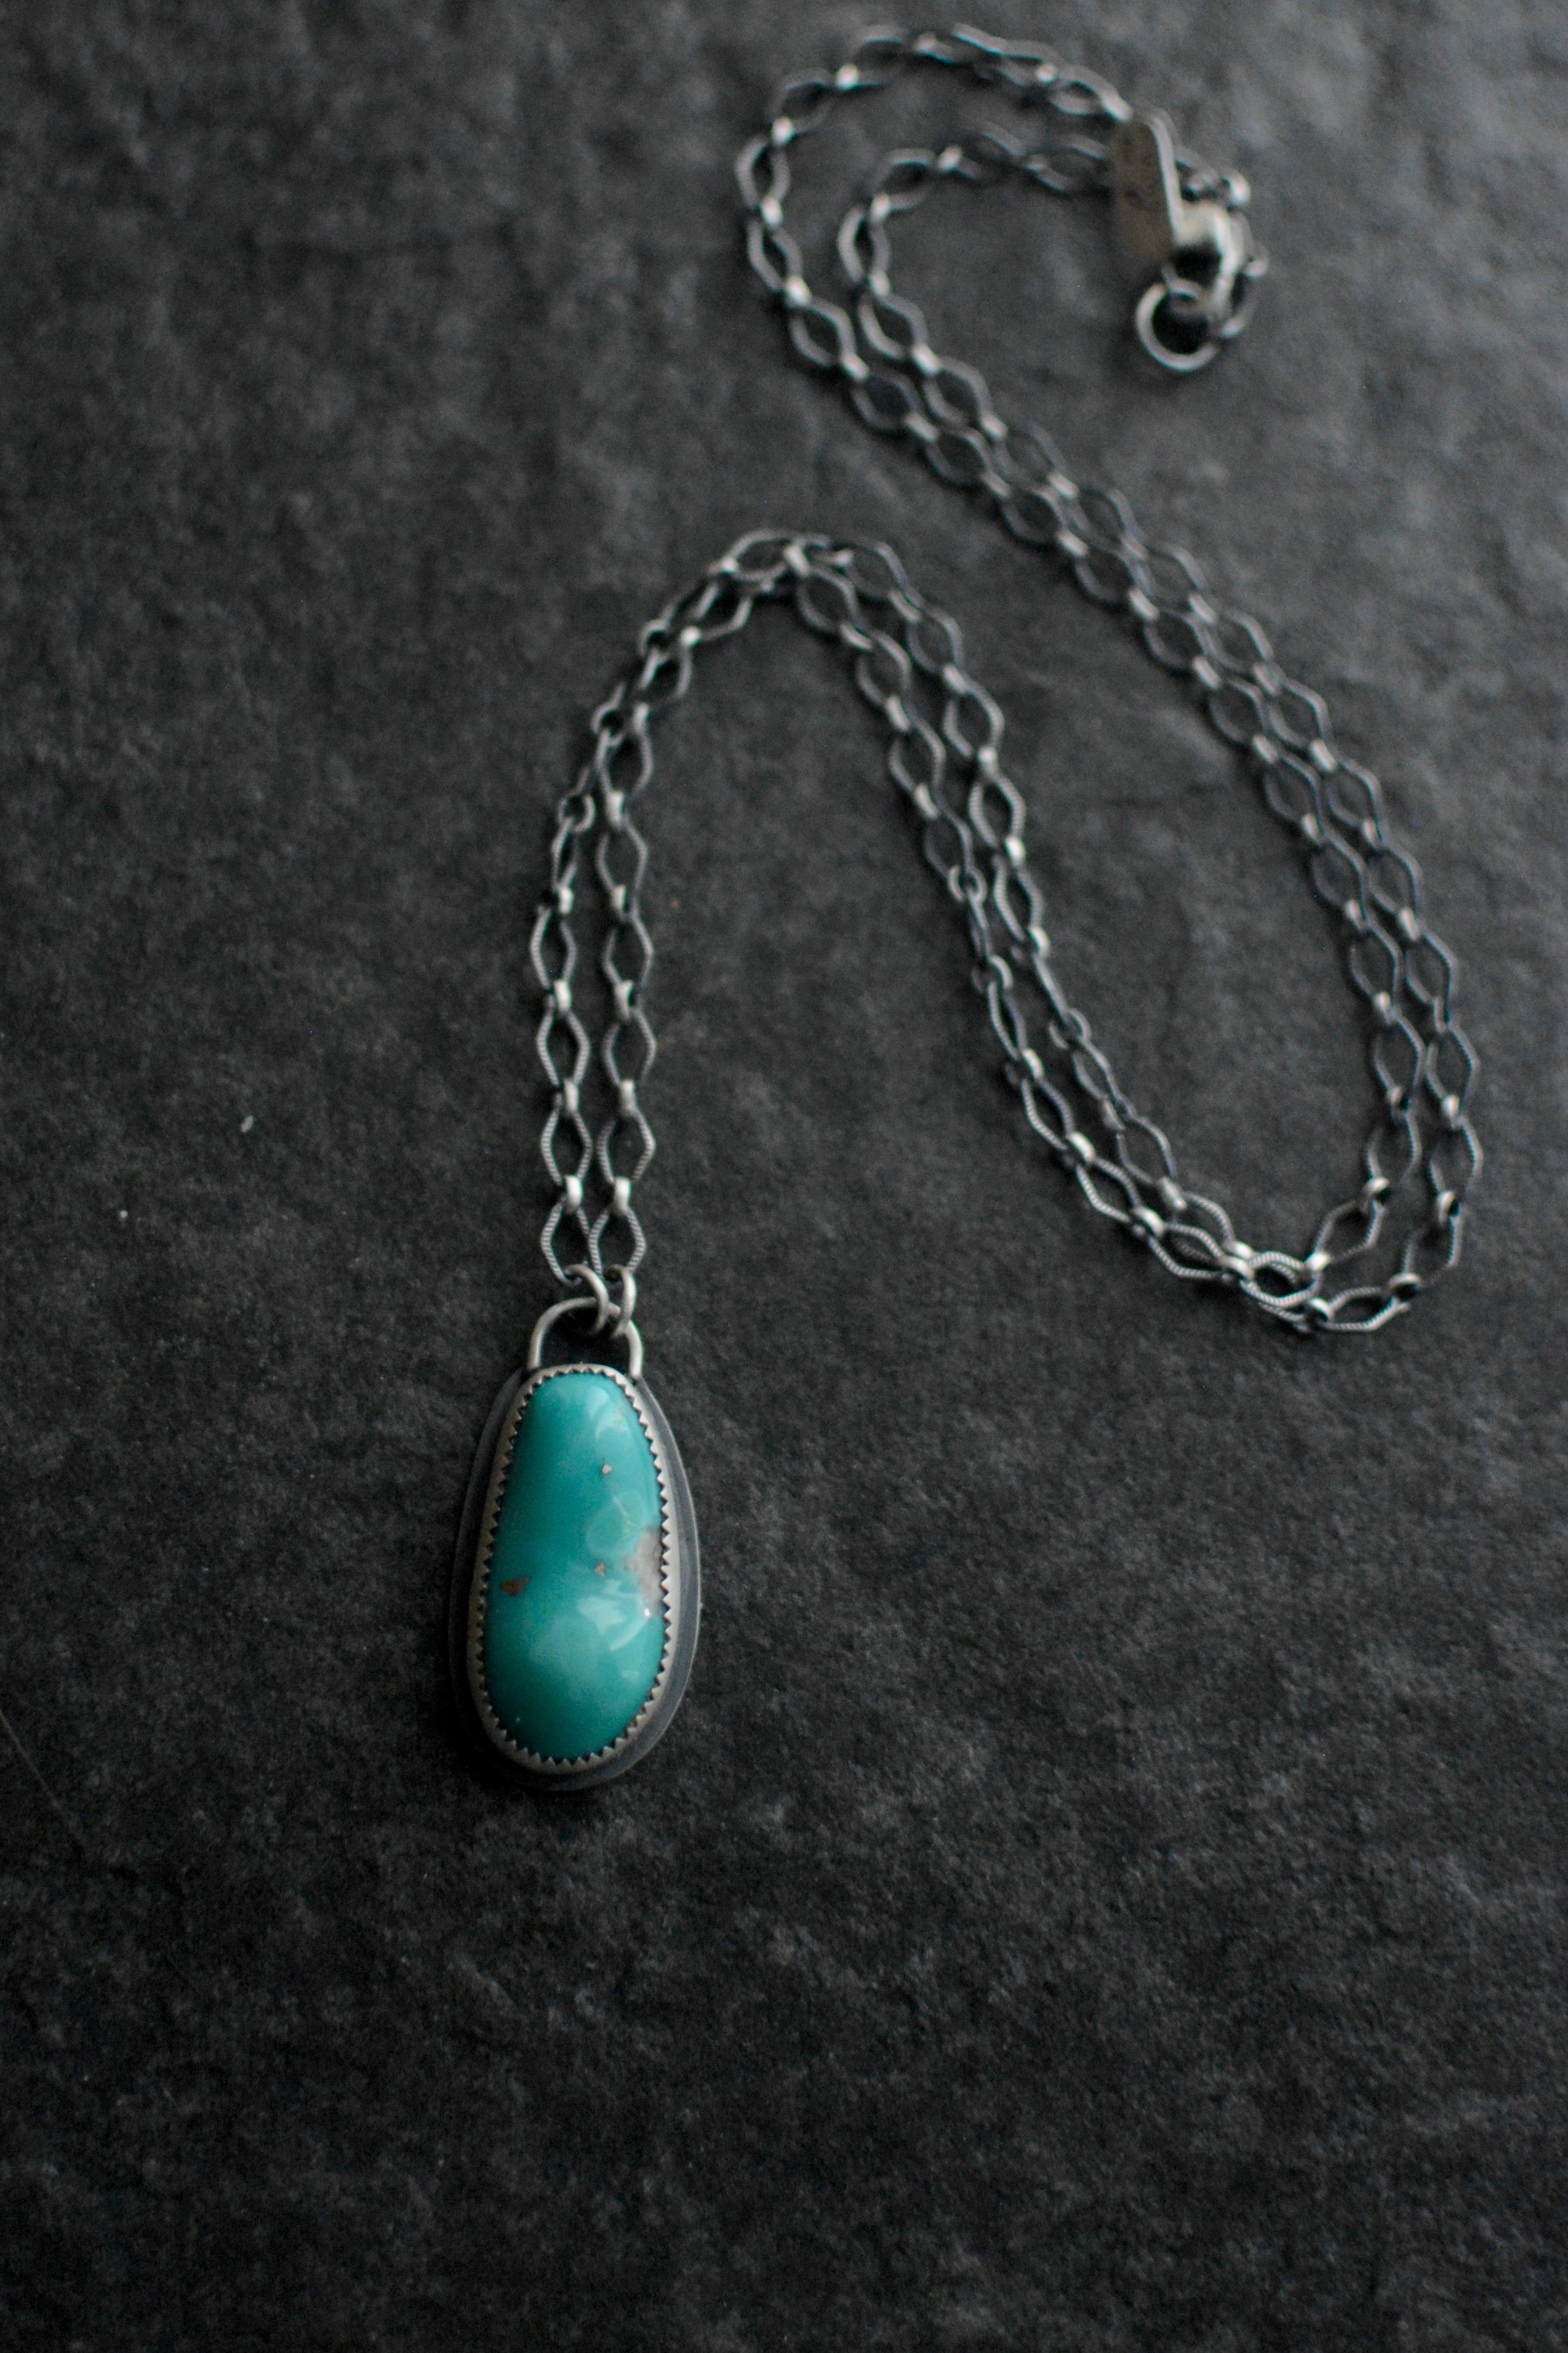 Campitos Turquoise Necklace - No. 1